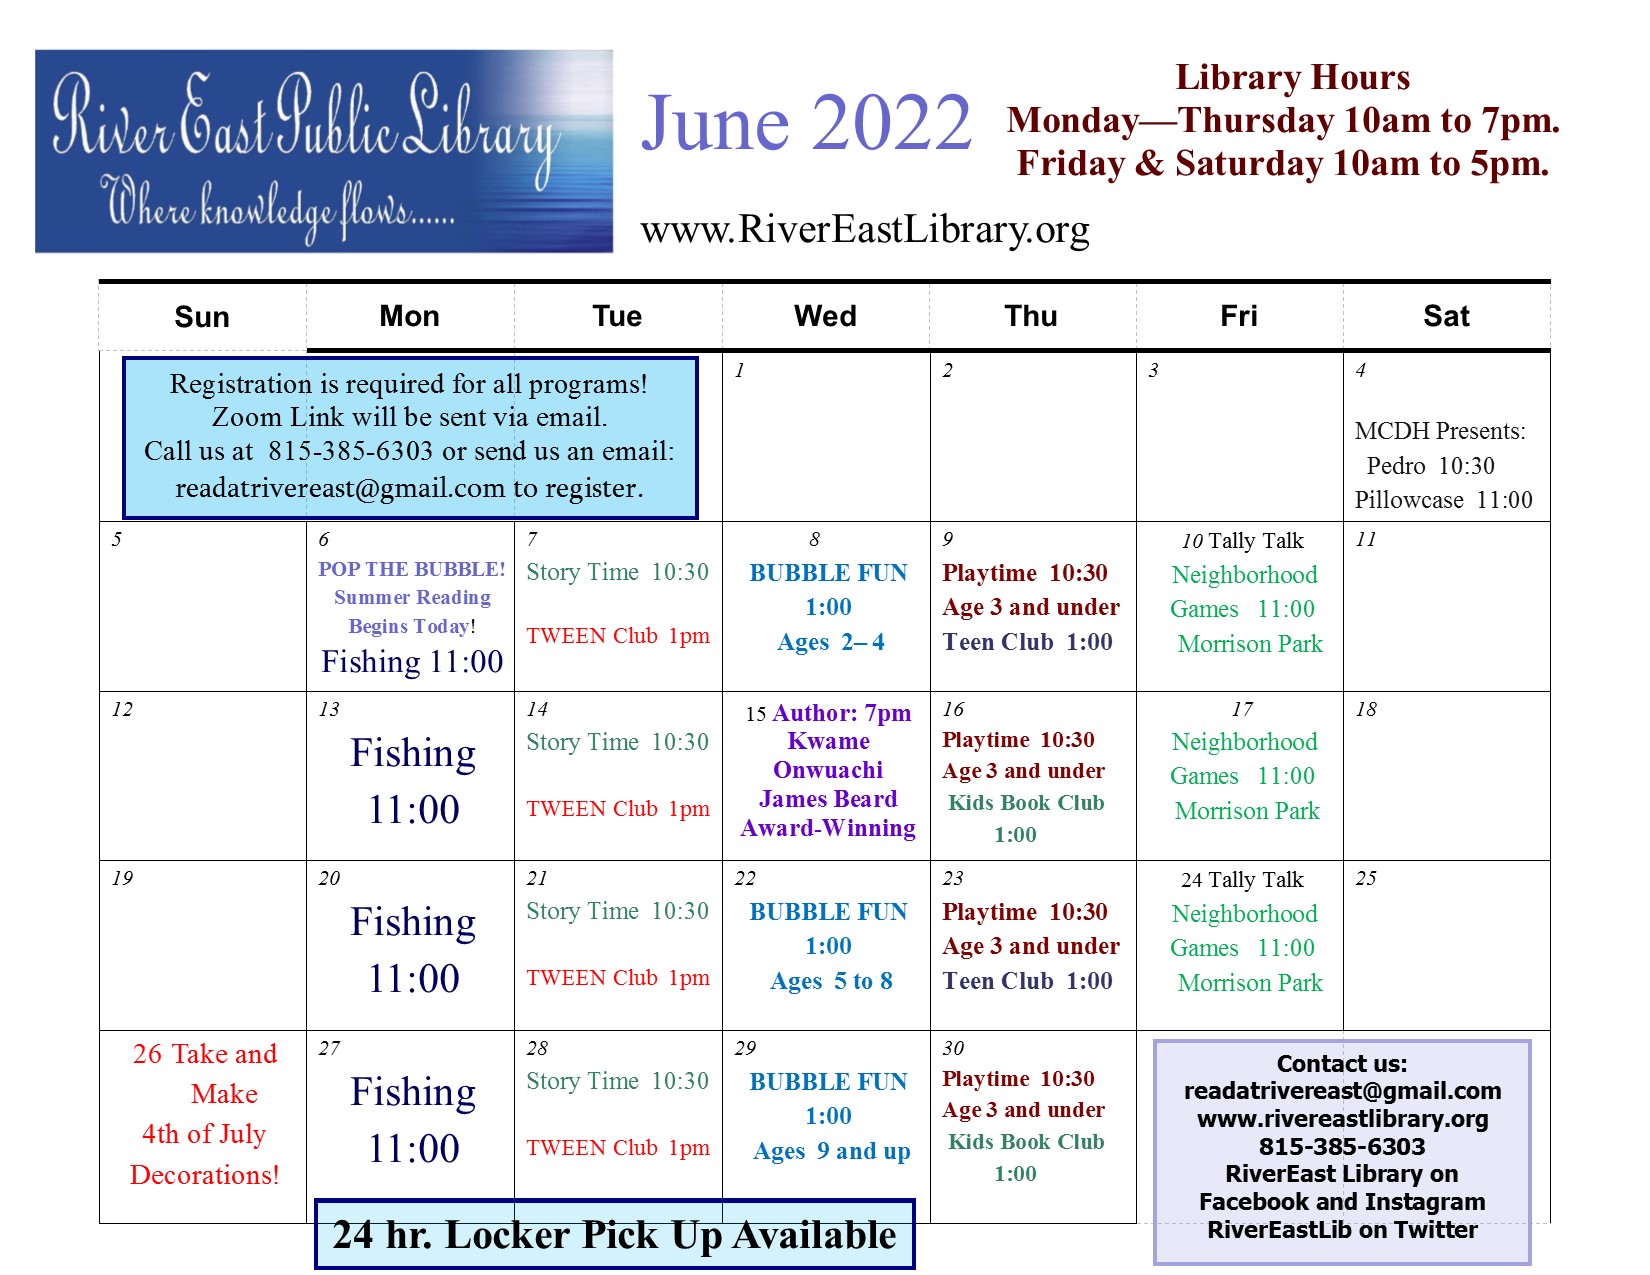 Poster for the June activities at River East